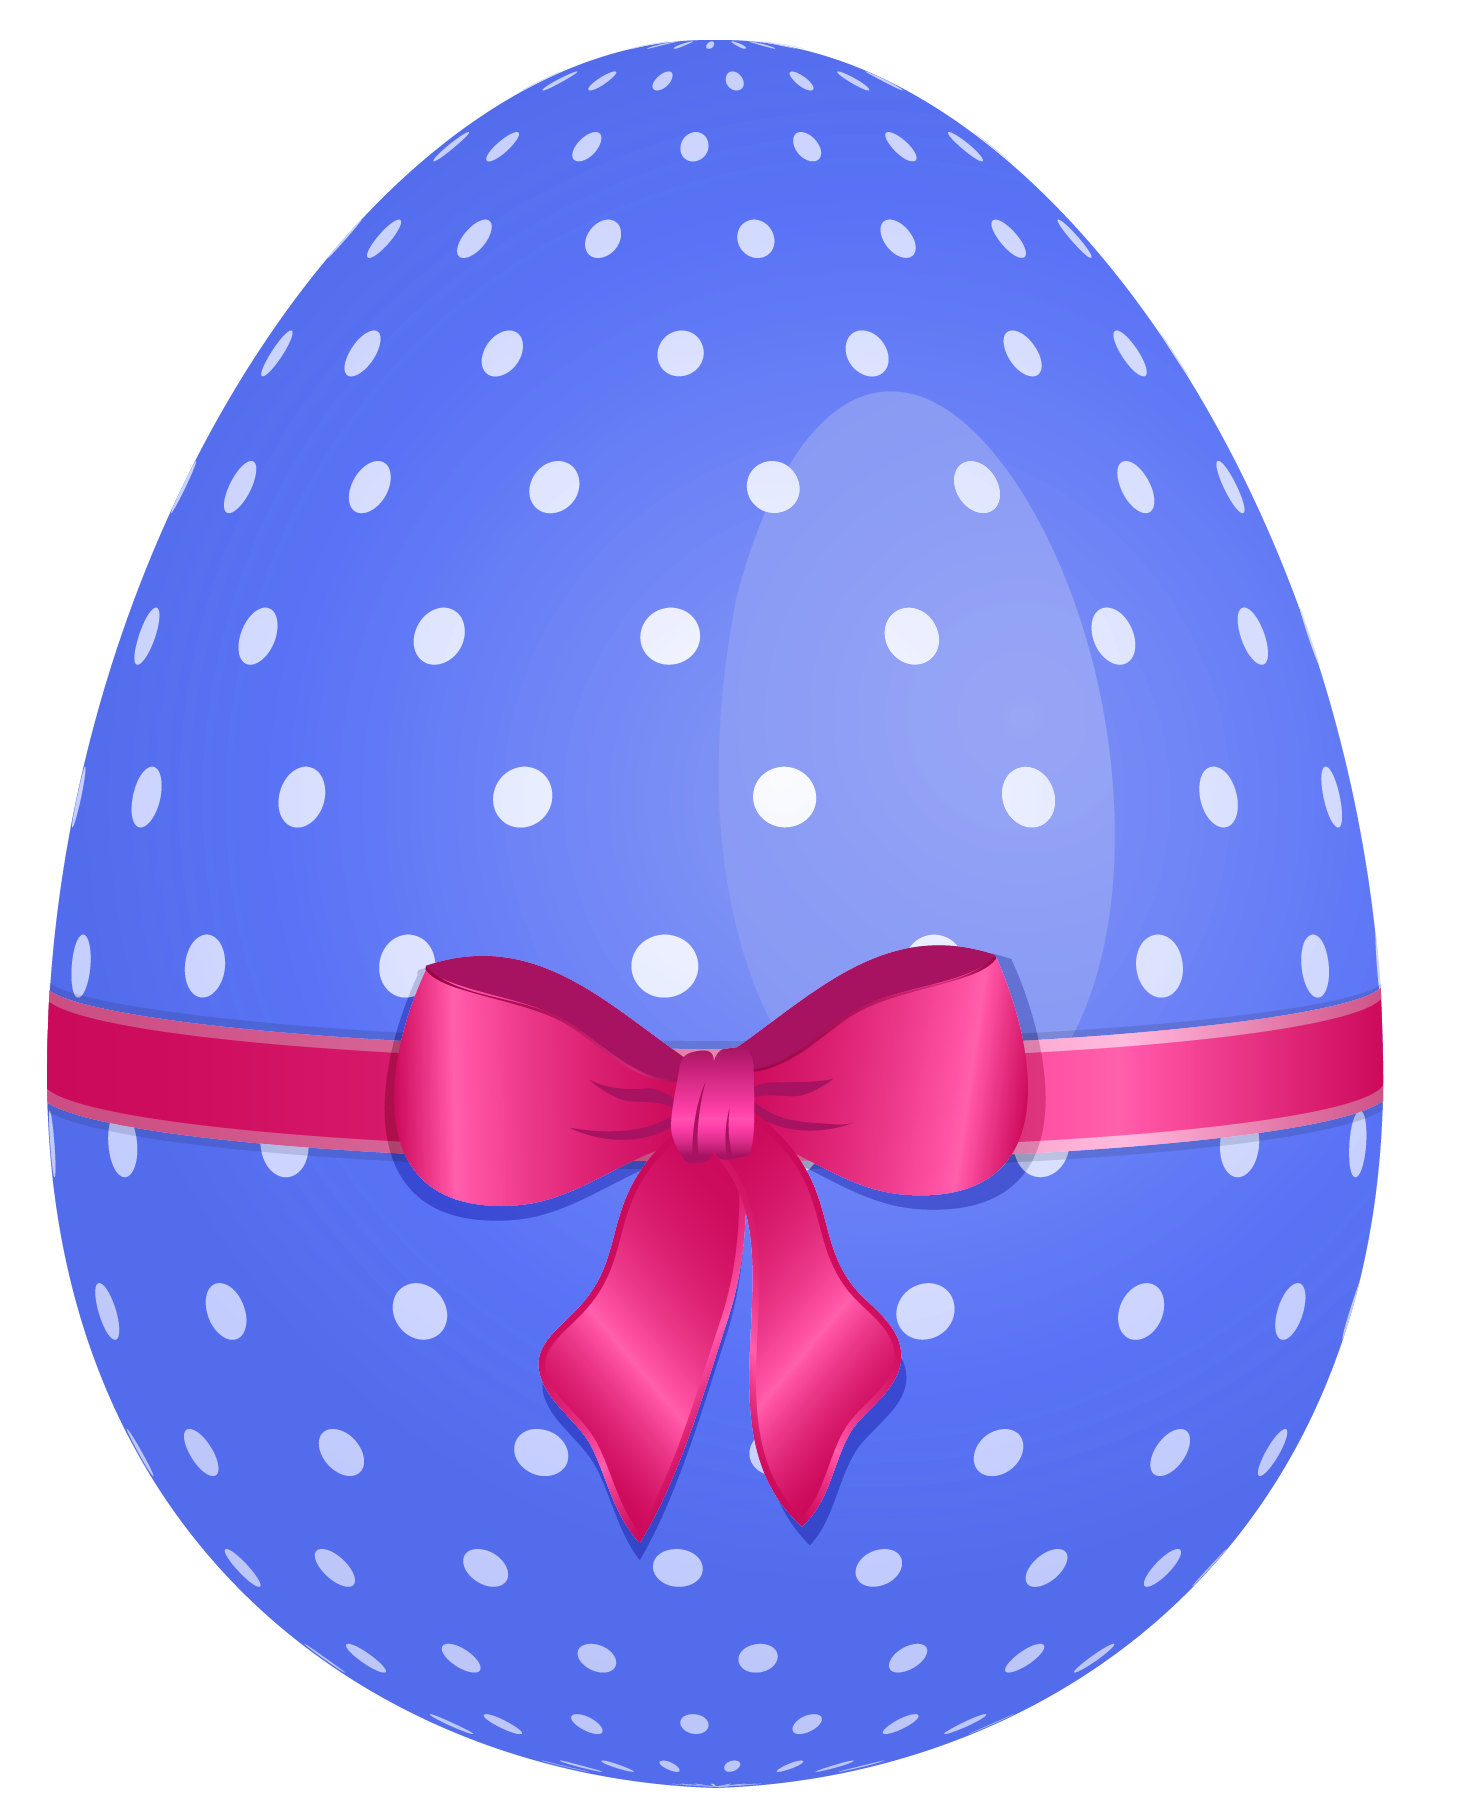 Blue Dotted Easter Egg with Pink Bow PNG Clipart